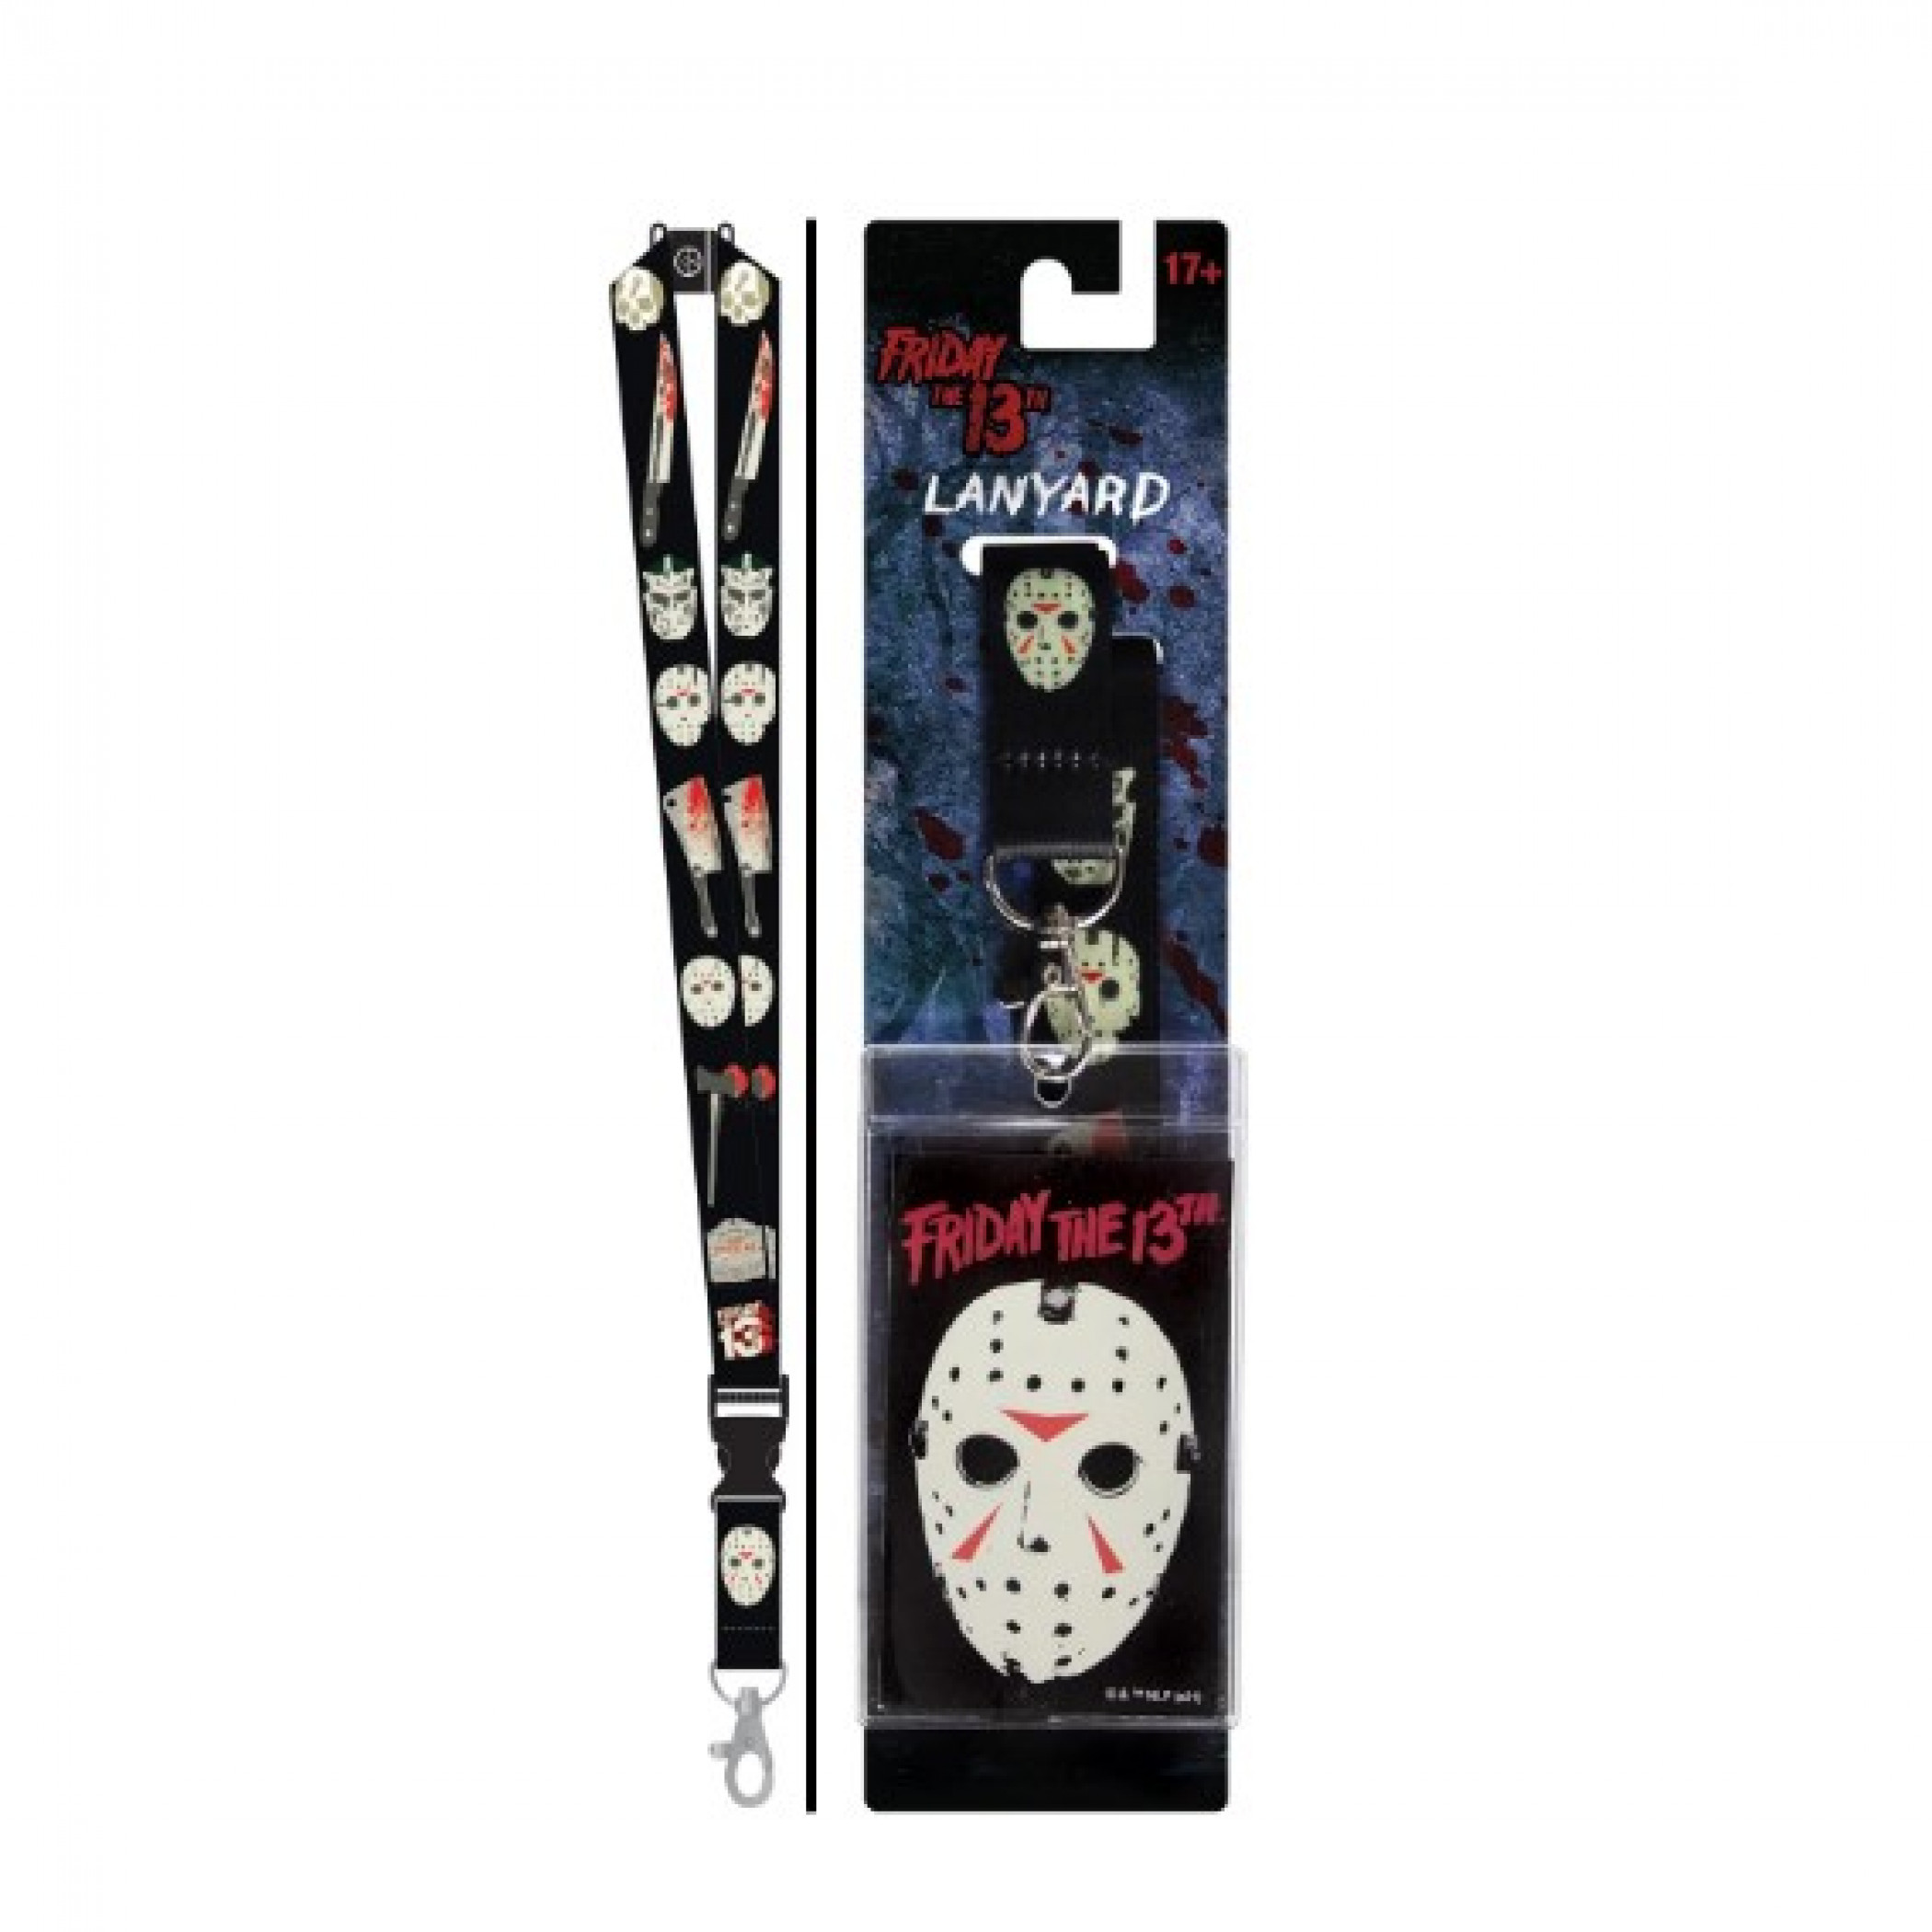 Friday the 13th Jason Voorhees Mask Lanyard